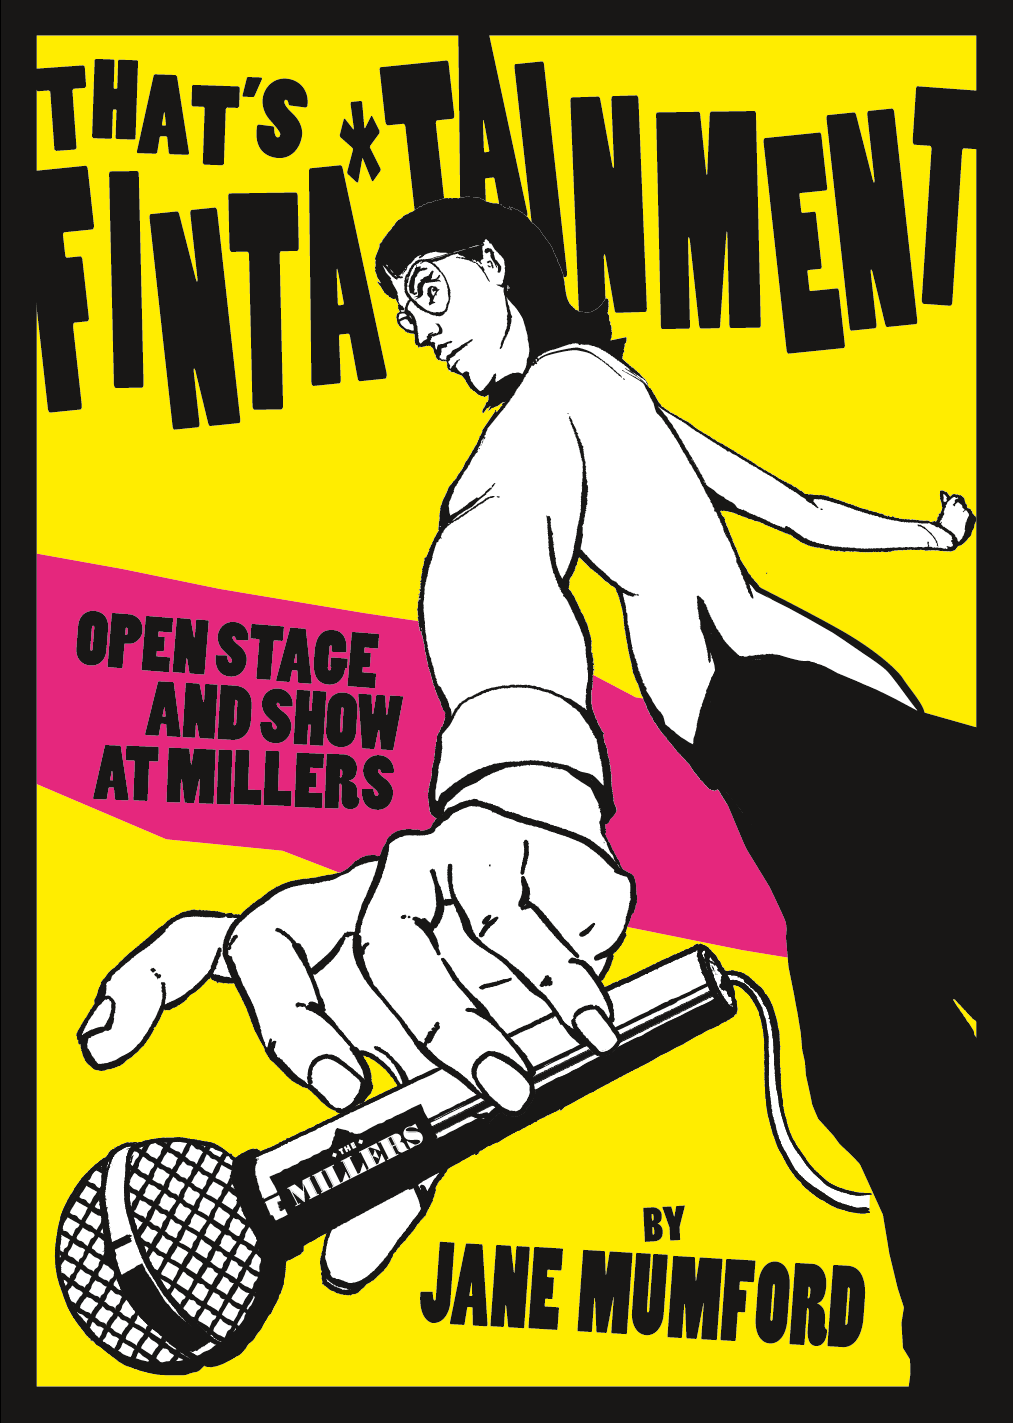 That's Finta*tainment - Open Stage and Show!